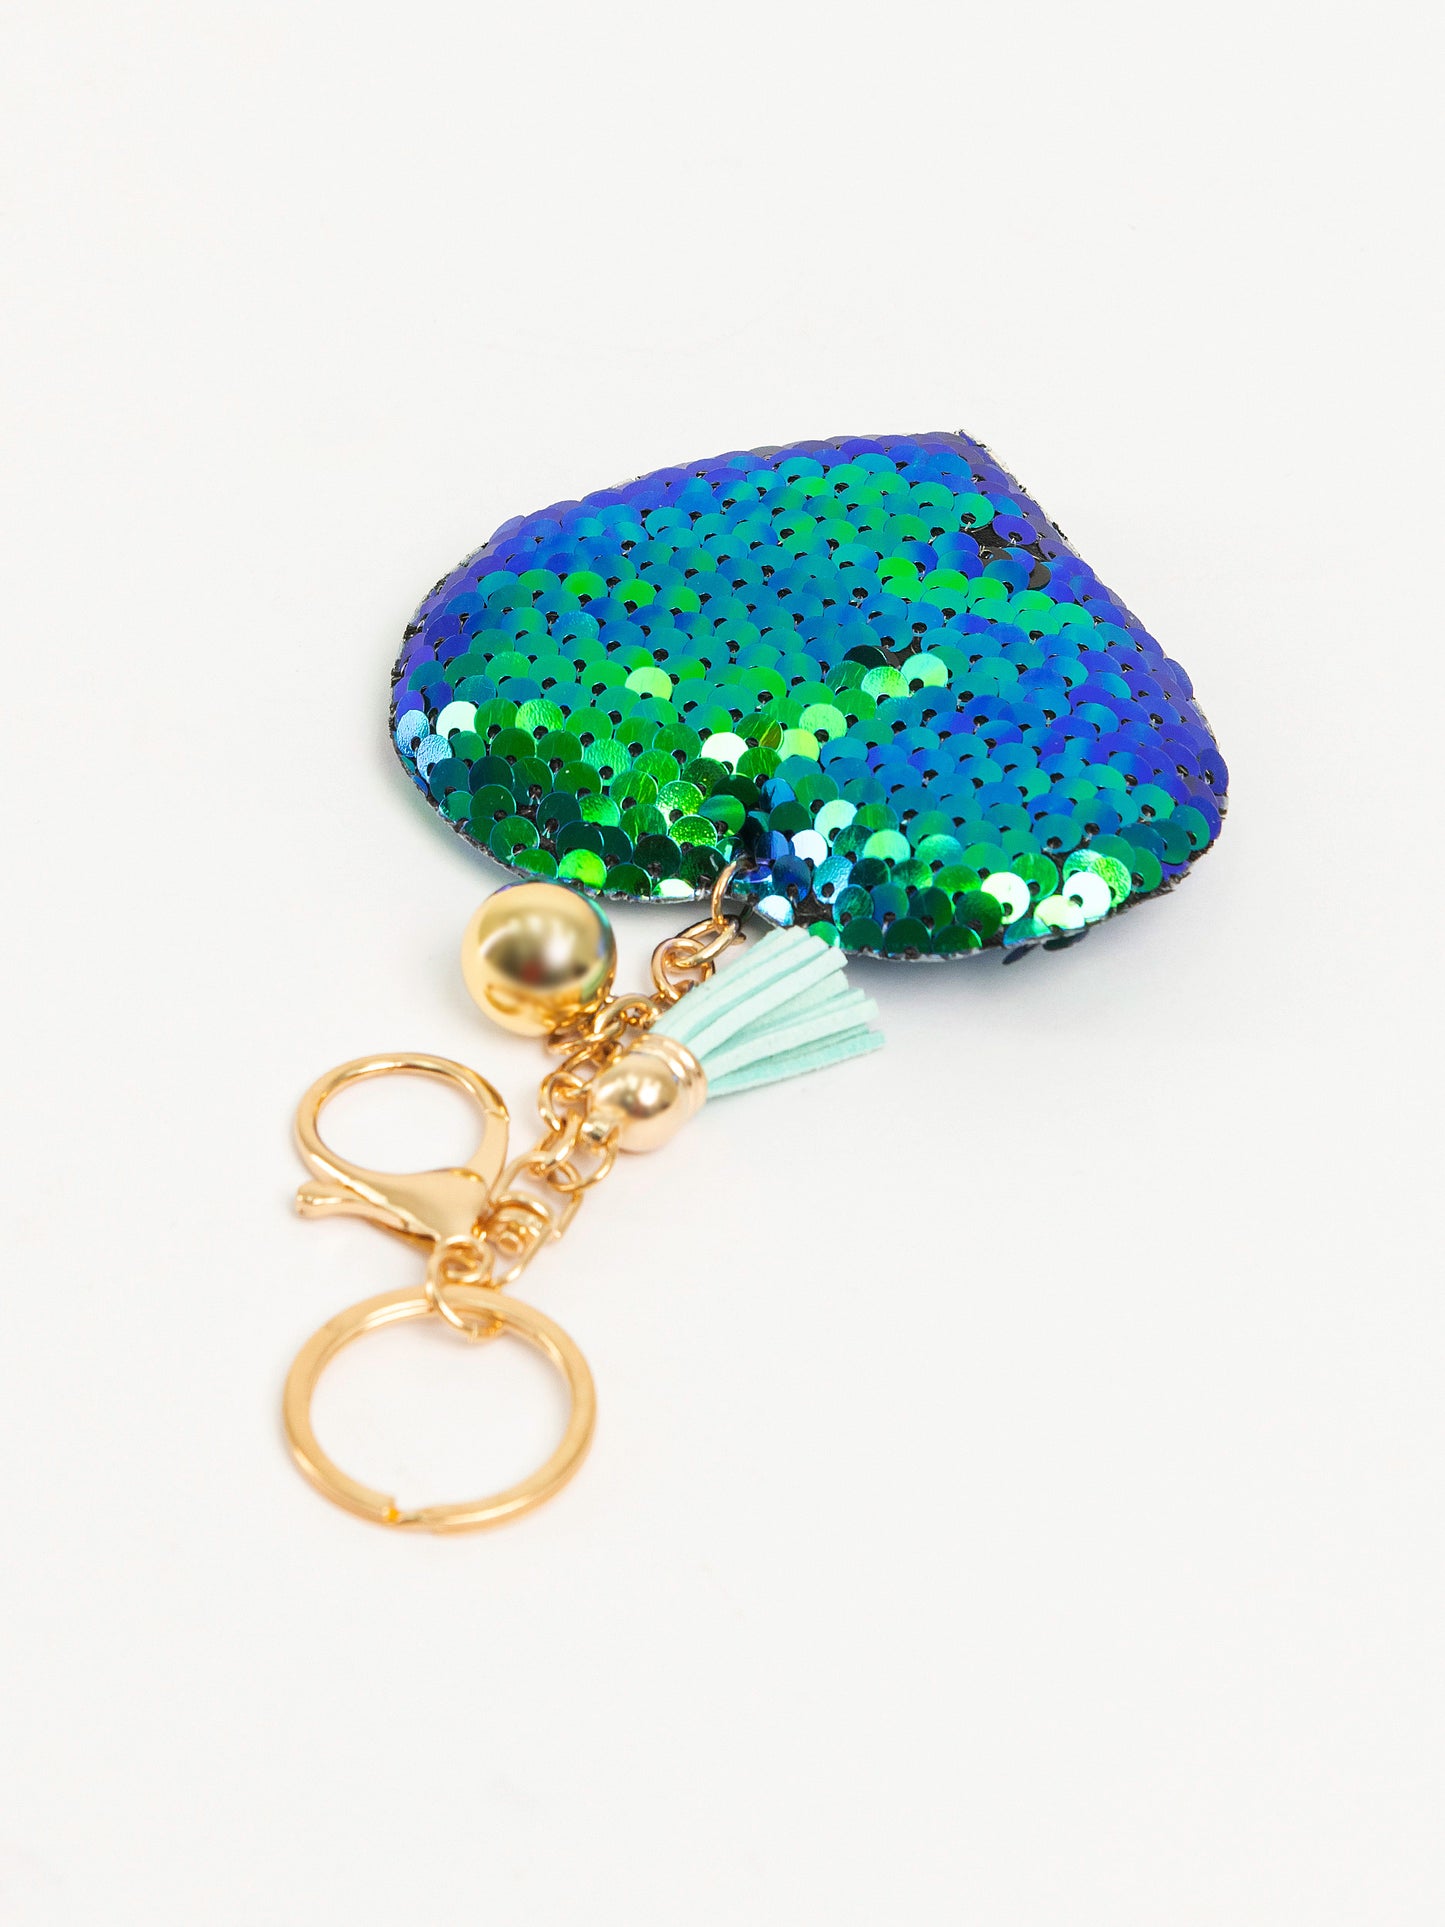 Sequined Heart Keychain